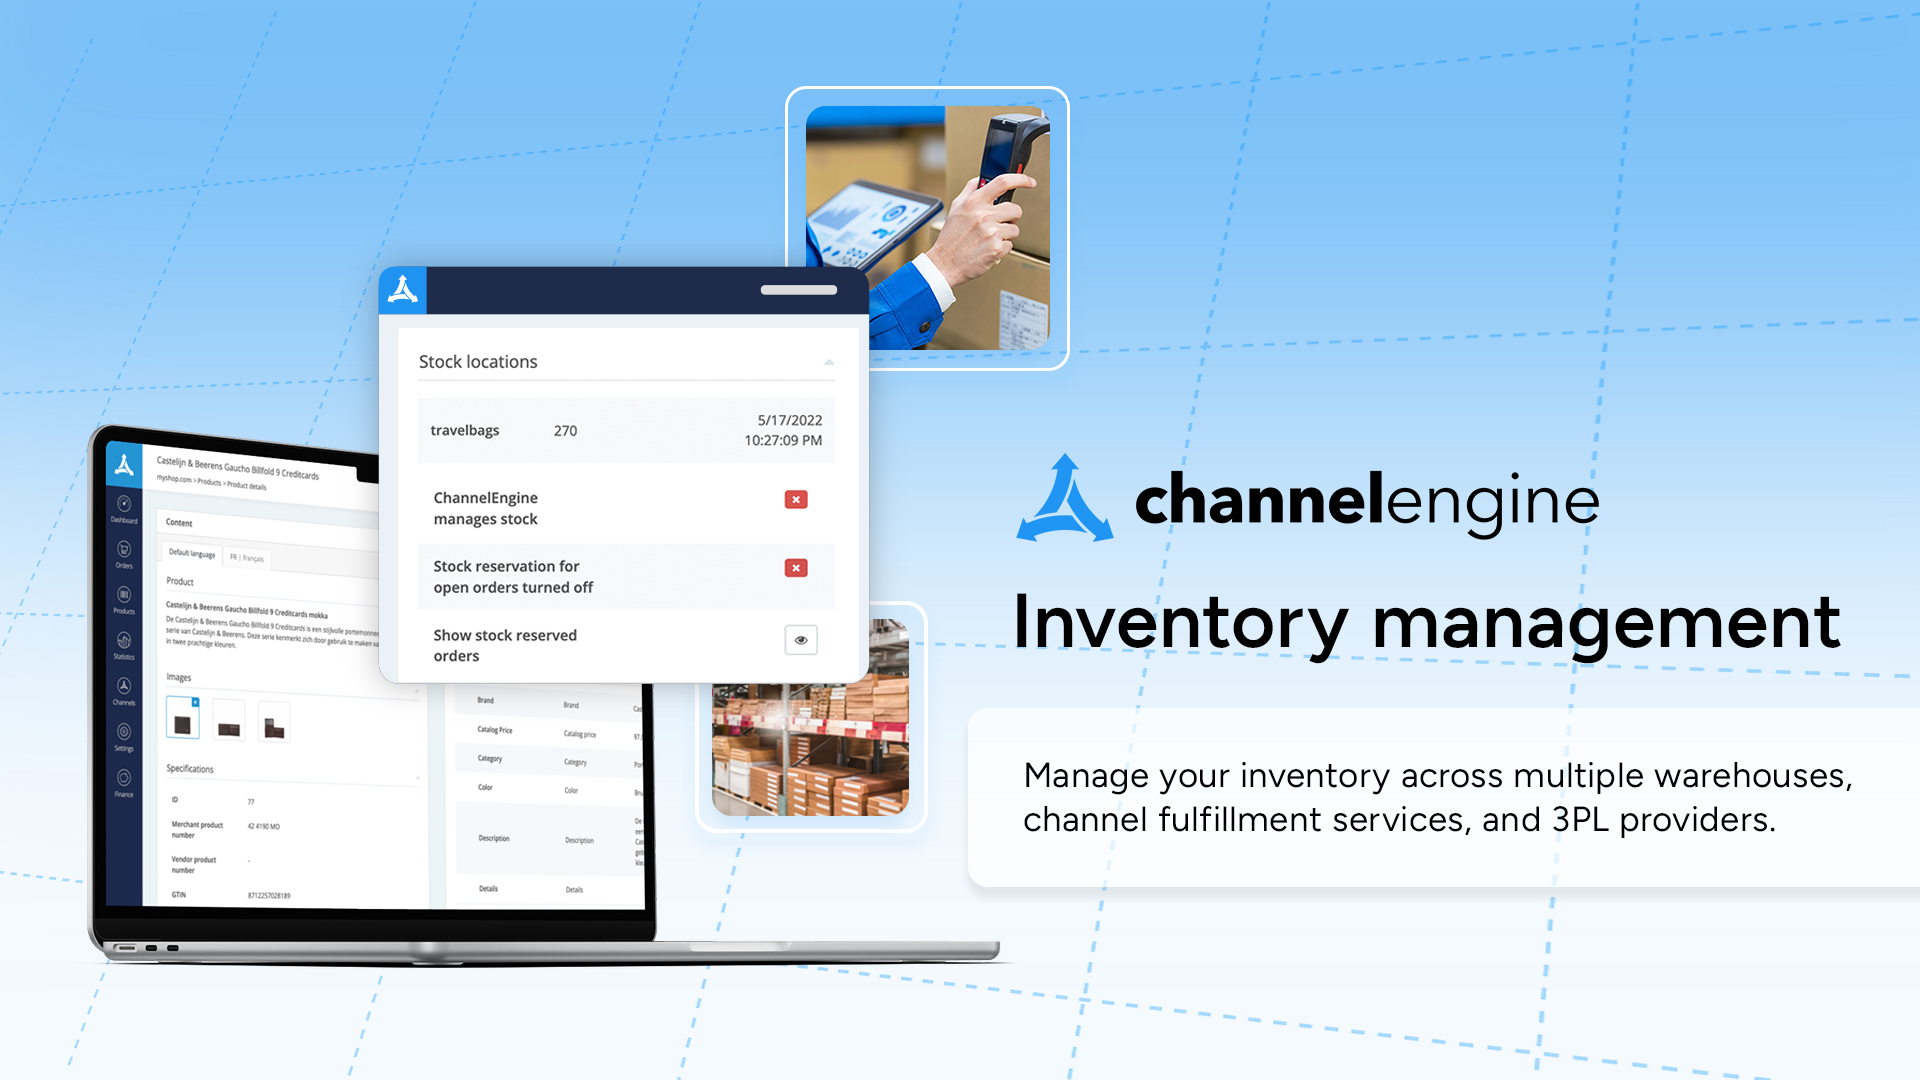 Manage your inventory across multiple warehouses, channel fulfillment services, and 3PL providers.